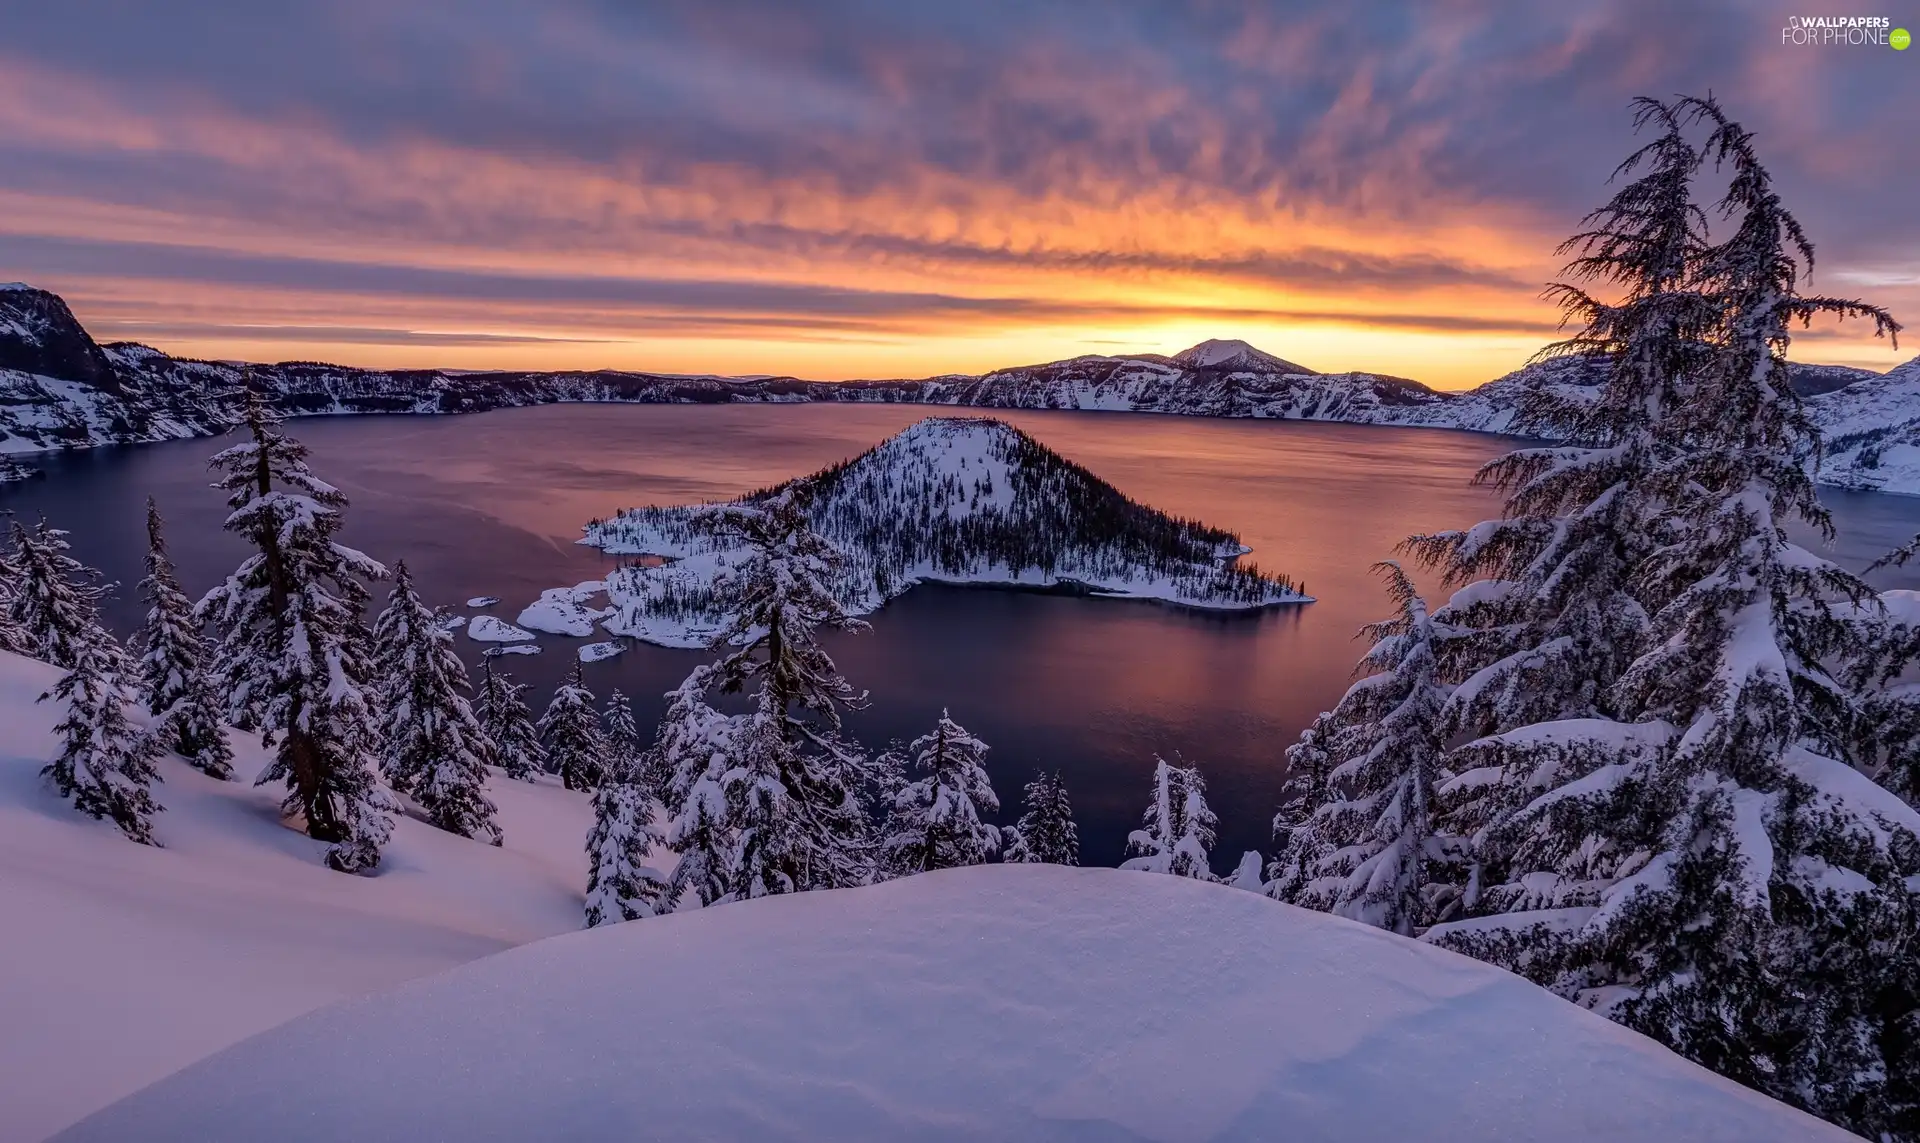 viewes, Mountains, Island of Wizard, State of Oregon, winter, Crater Lake National Park, Crater Lake, The United States, Sunrise, trees